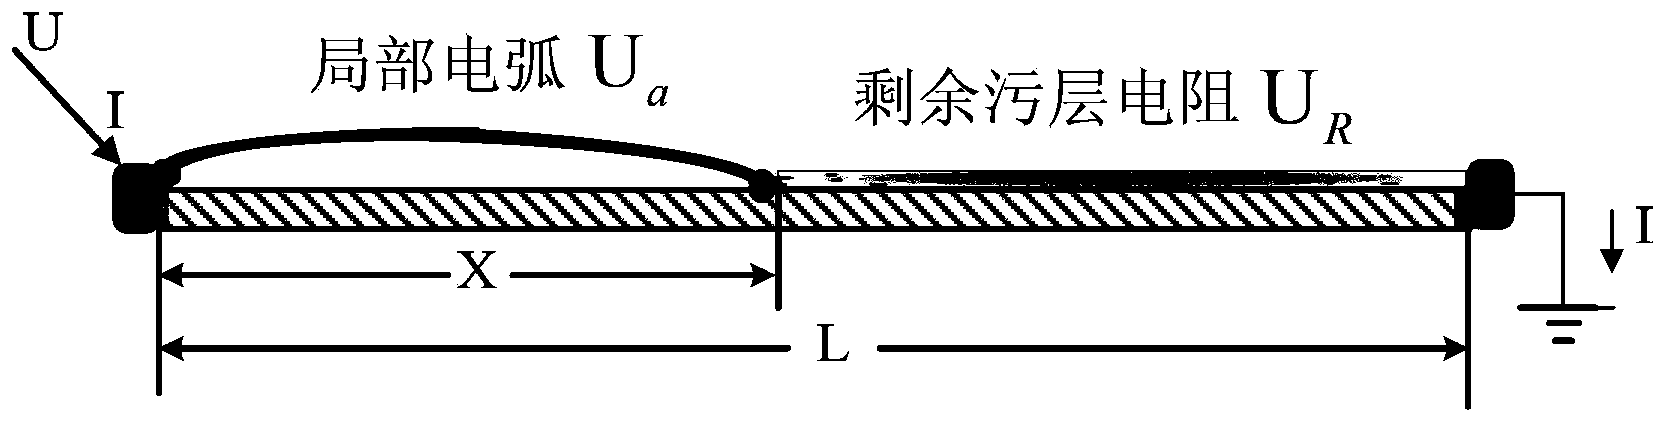 Flashover voltage prediction method for high speed train roof insulator